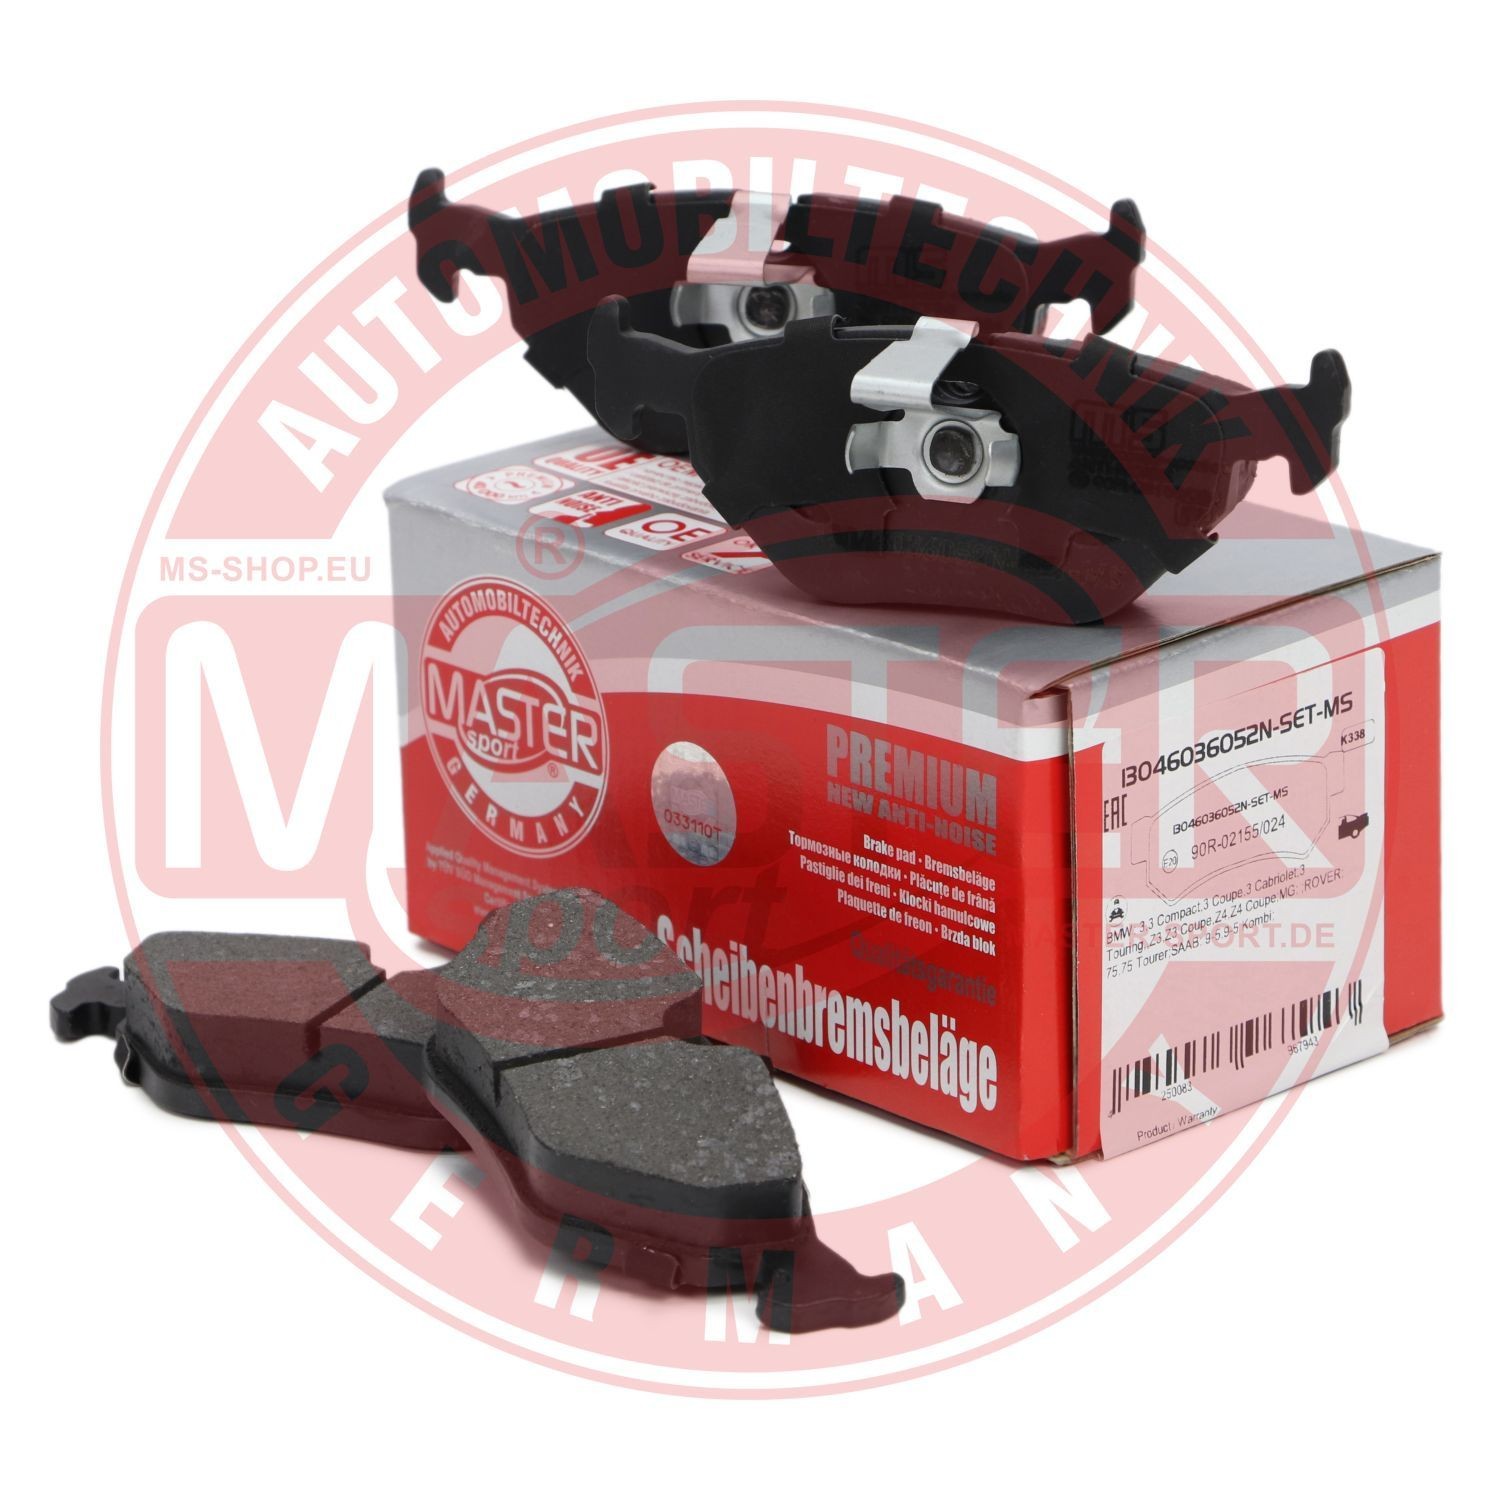 13046036052N-SET-MS Set of brake pads AB236036052 MASTER-SPORT Rear Axle, prepared for wear indicator, excl. wear warning contact, with anti-squeak plate